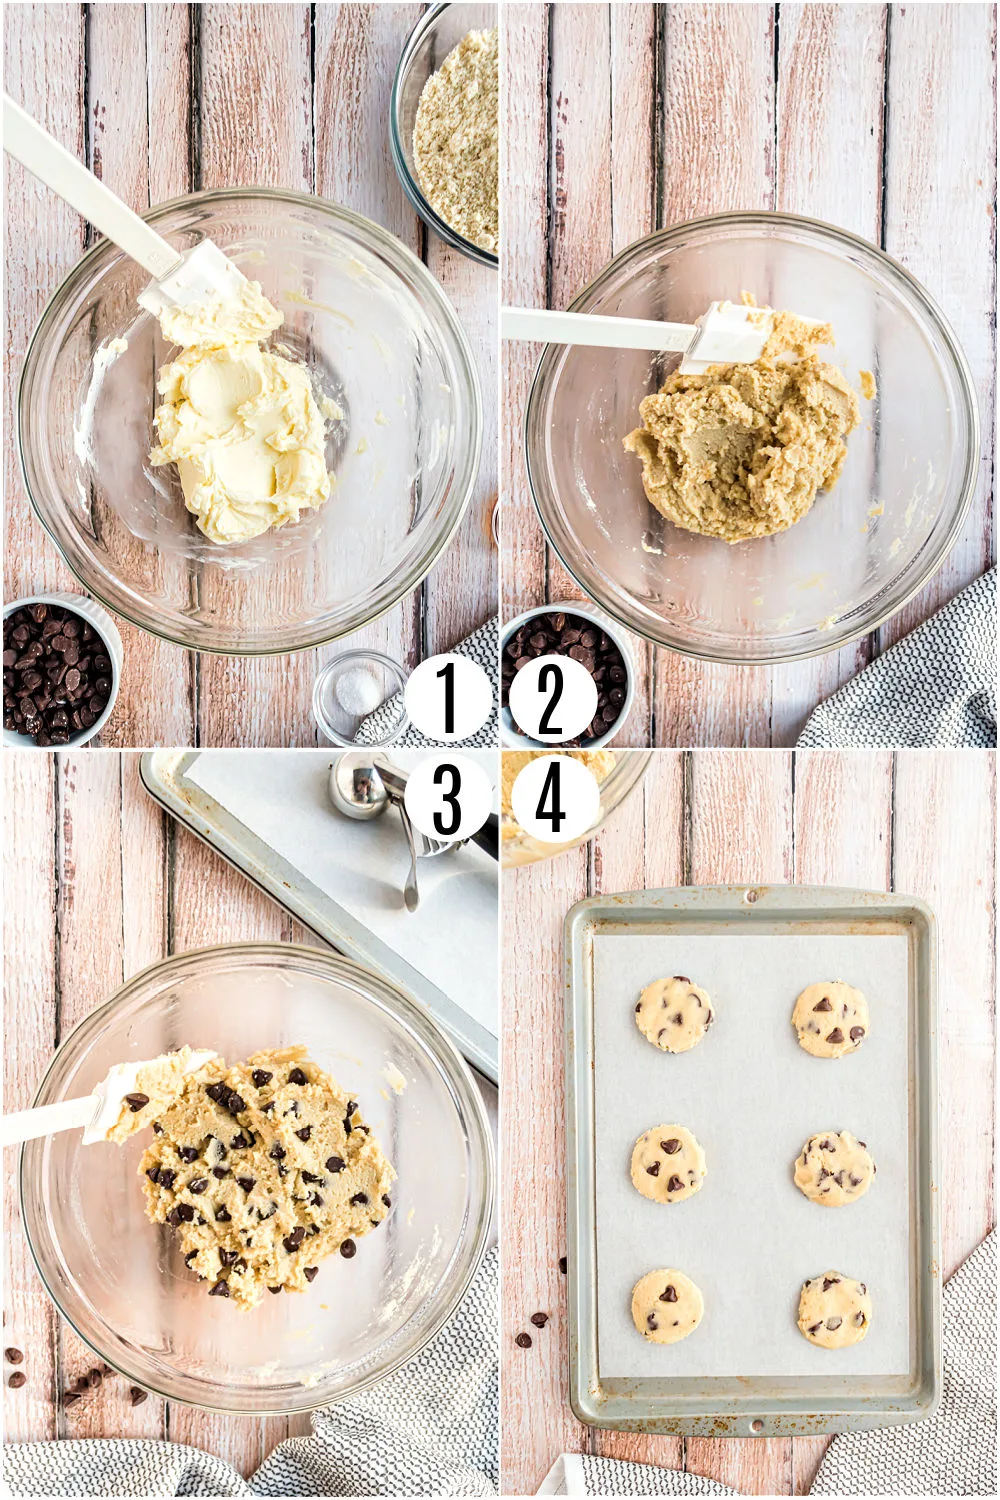 Step by step photos showing how to make chocolate chip shortbread cookies.